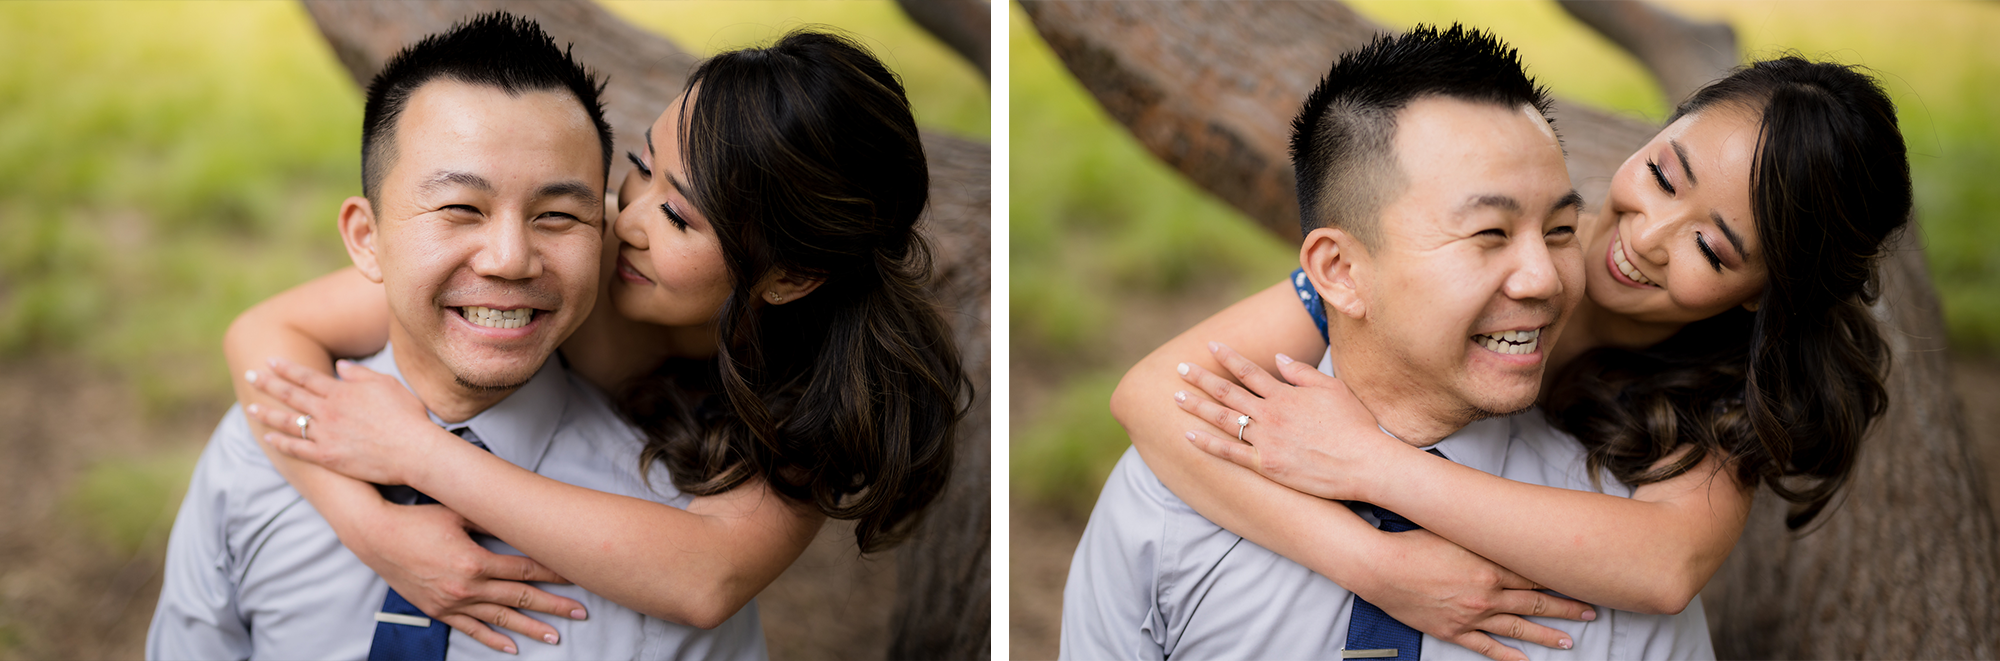 4-FH-Irvine-Jeffrey-Open-Space-Laguna-Victoria-Beach-Engagement-Session-Photos-Andrew-Kwak-Photography.png